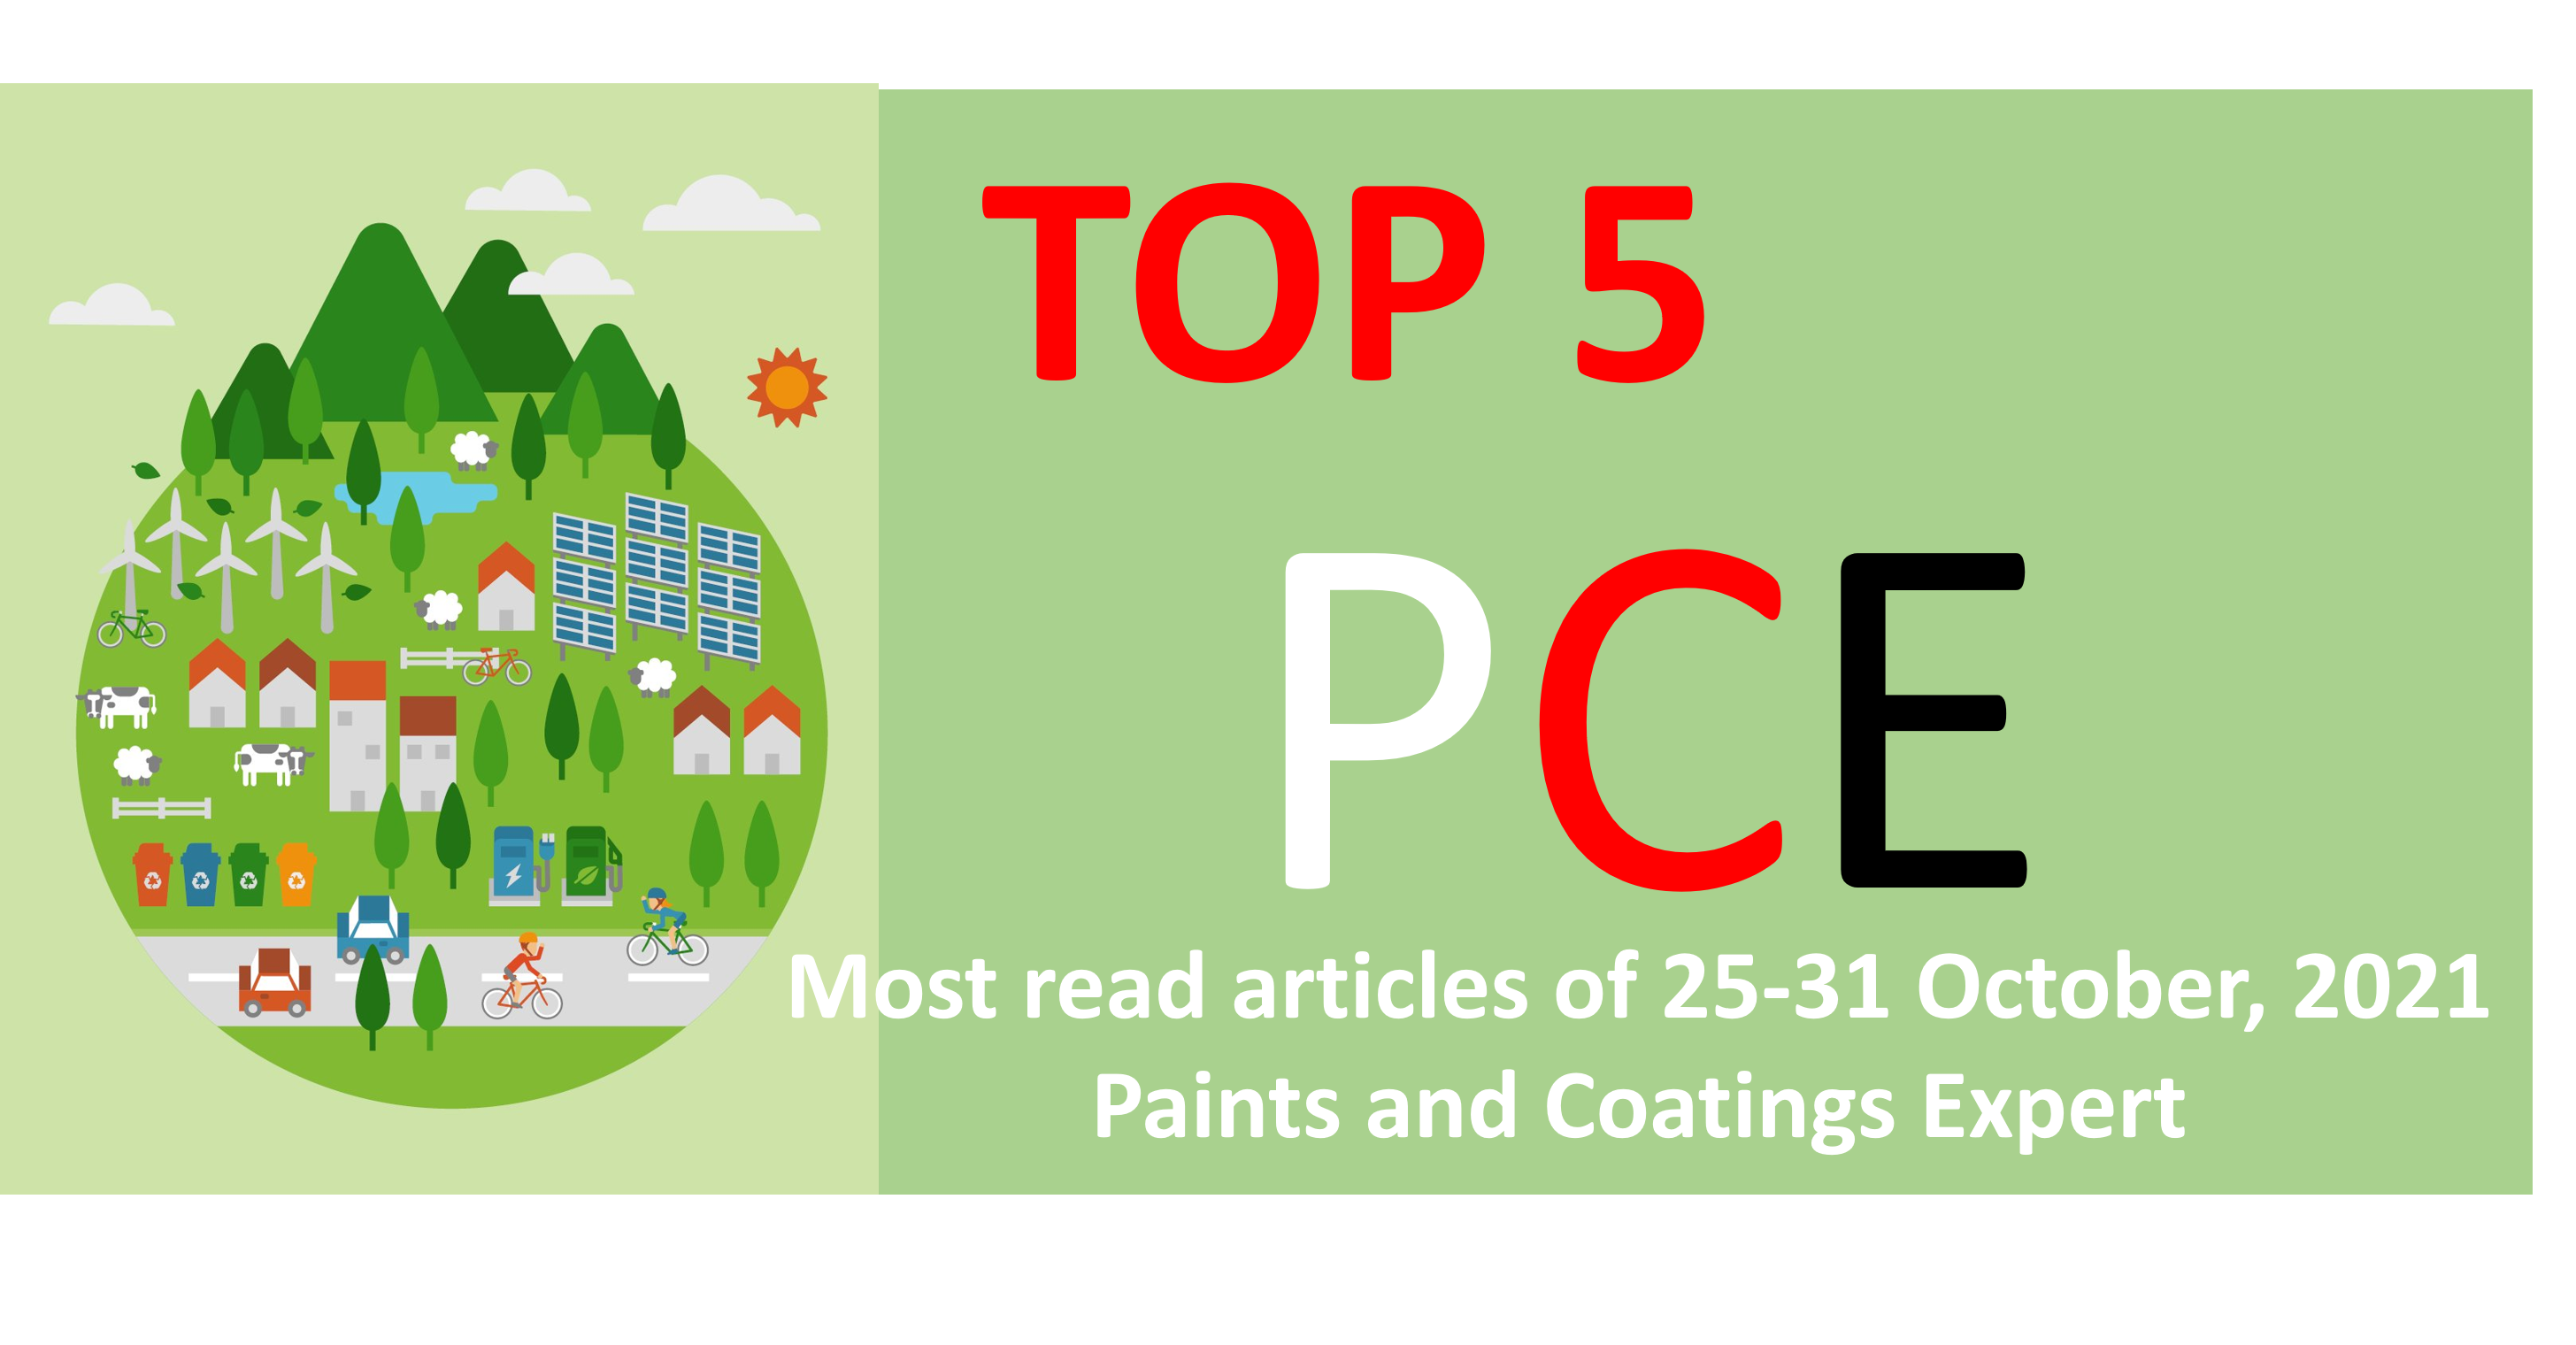 Most read articles of 25-31 October, 2021 on PCE | All About Paints and Coatings